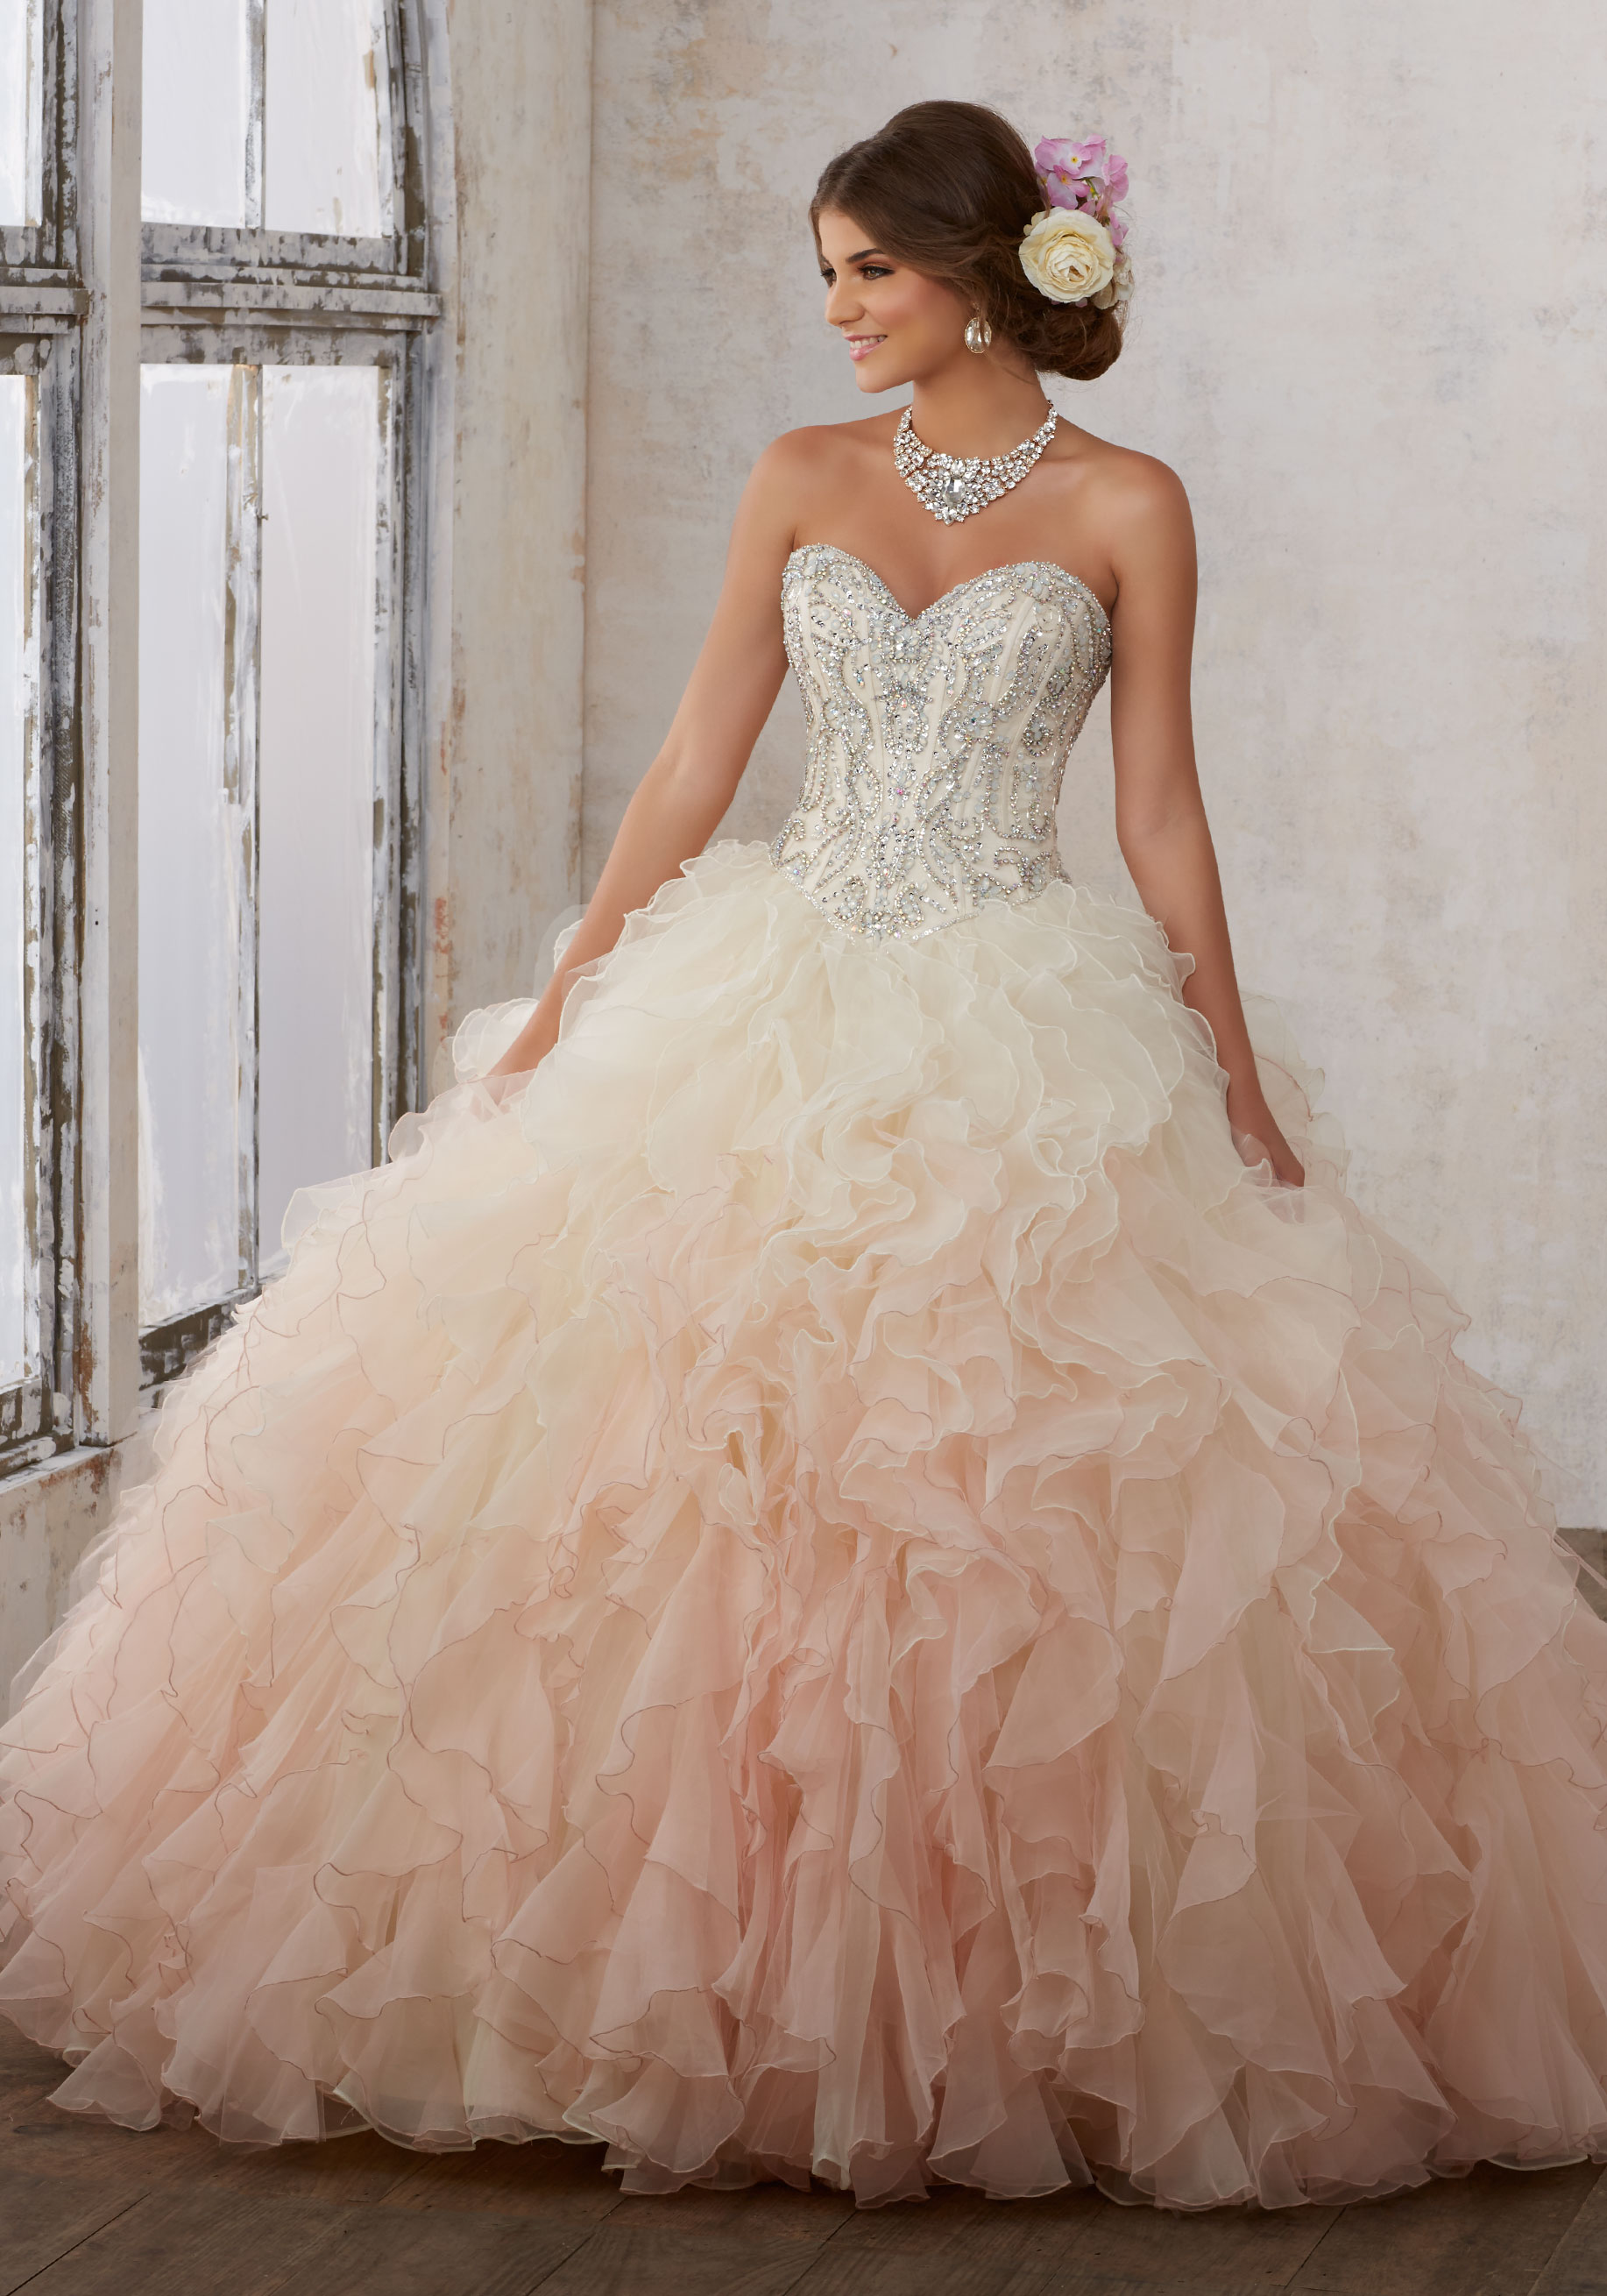 A woman in a pink ombre Quinceañera dress posing for a picture in a ball gown